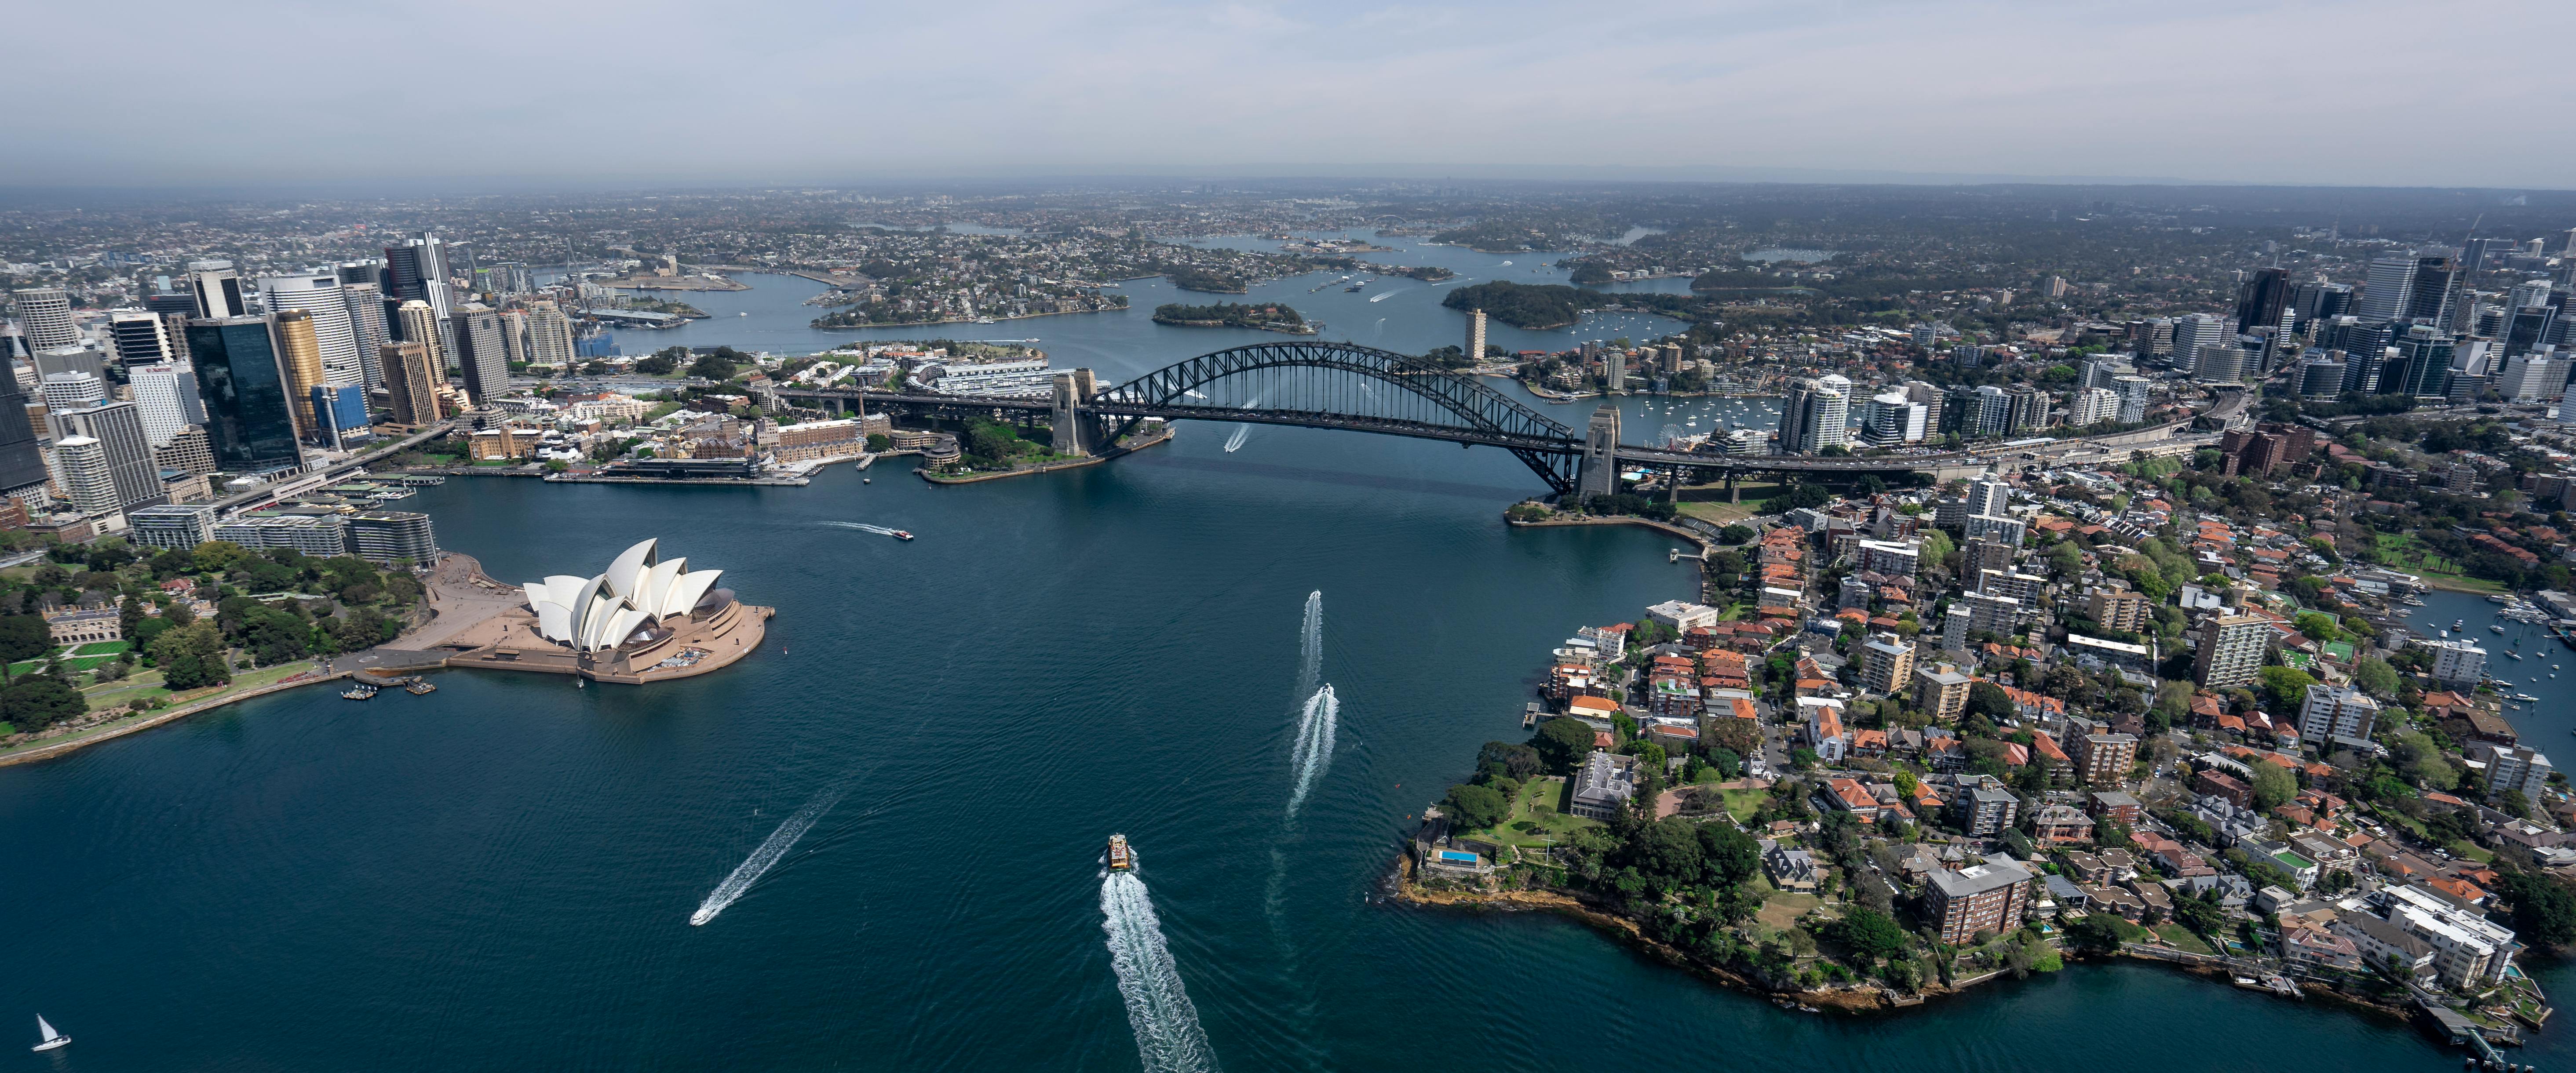 Tour Australia for an unforgettable summer experience 
Sydney from $112